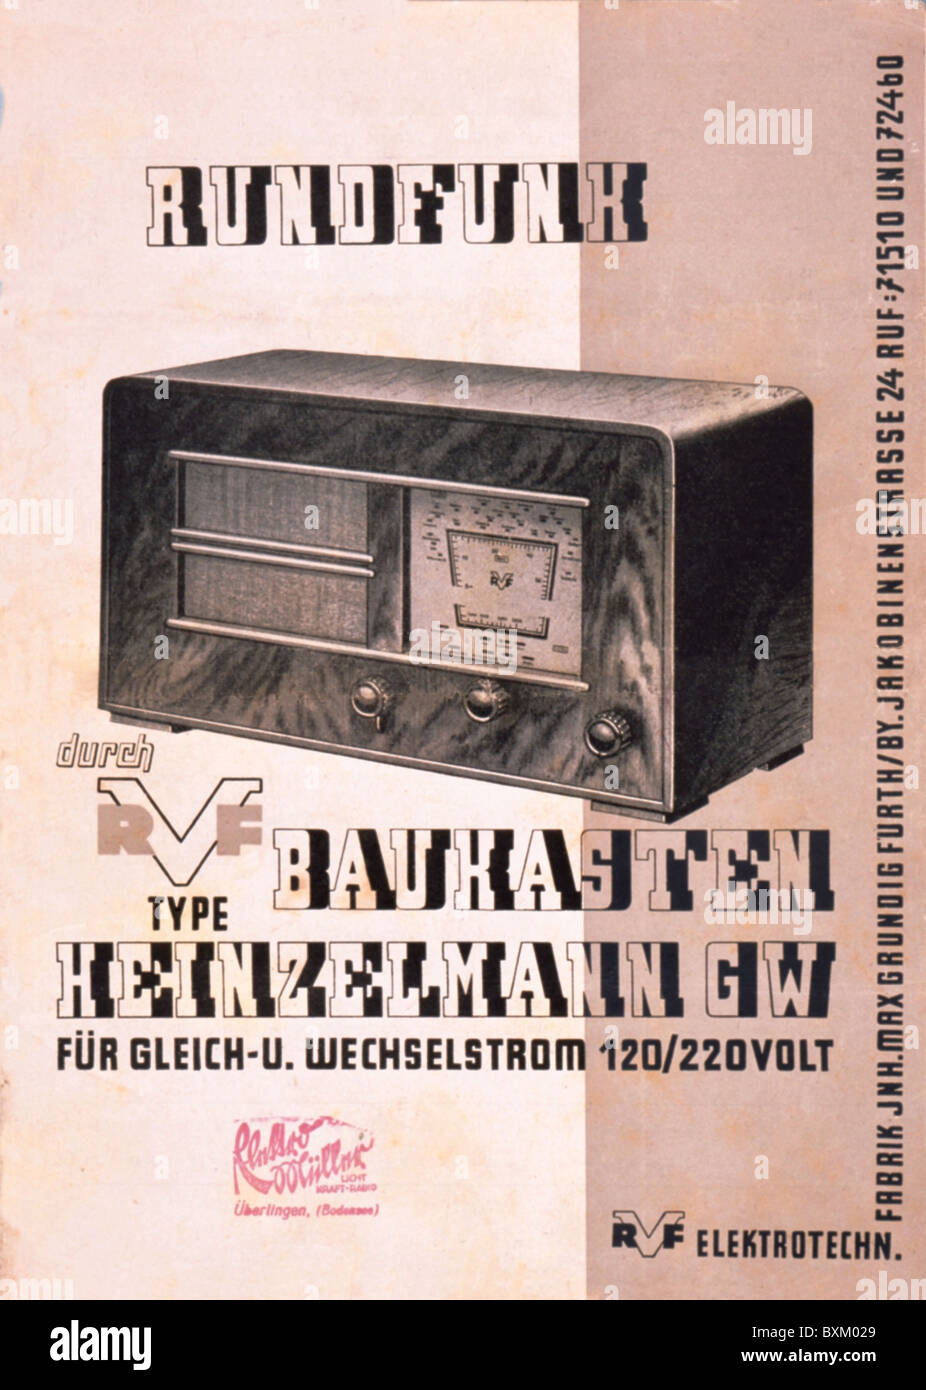 Broadcast, radio, radio set Heinzelmann, advertising, 1946, Additional-Rights-clearences-not available Foto Stock